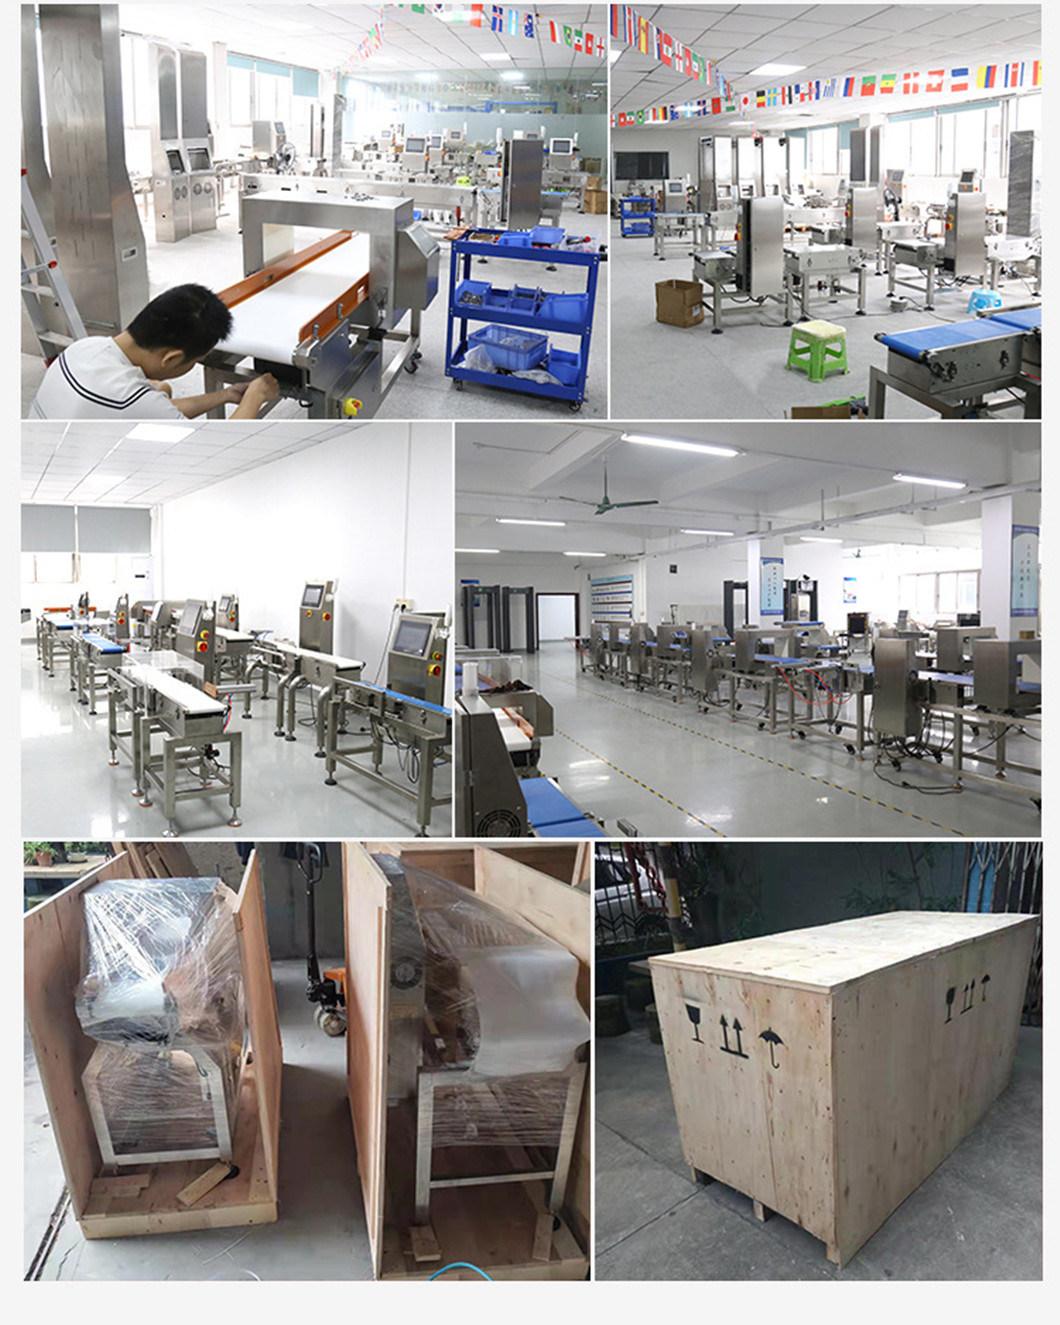 Good Quality Online Weight Check Machine Automatic Food Conveyor Belts Scales Inline Checkweigher Check Weigher